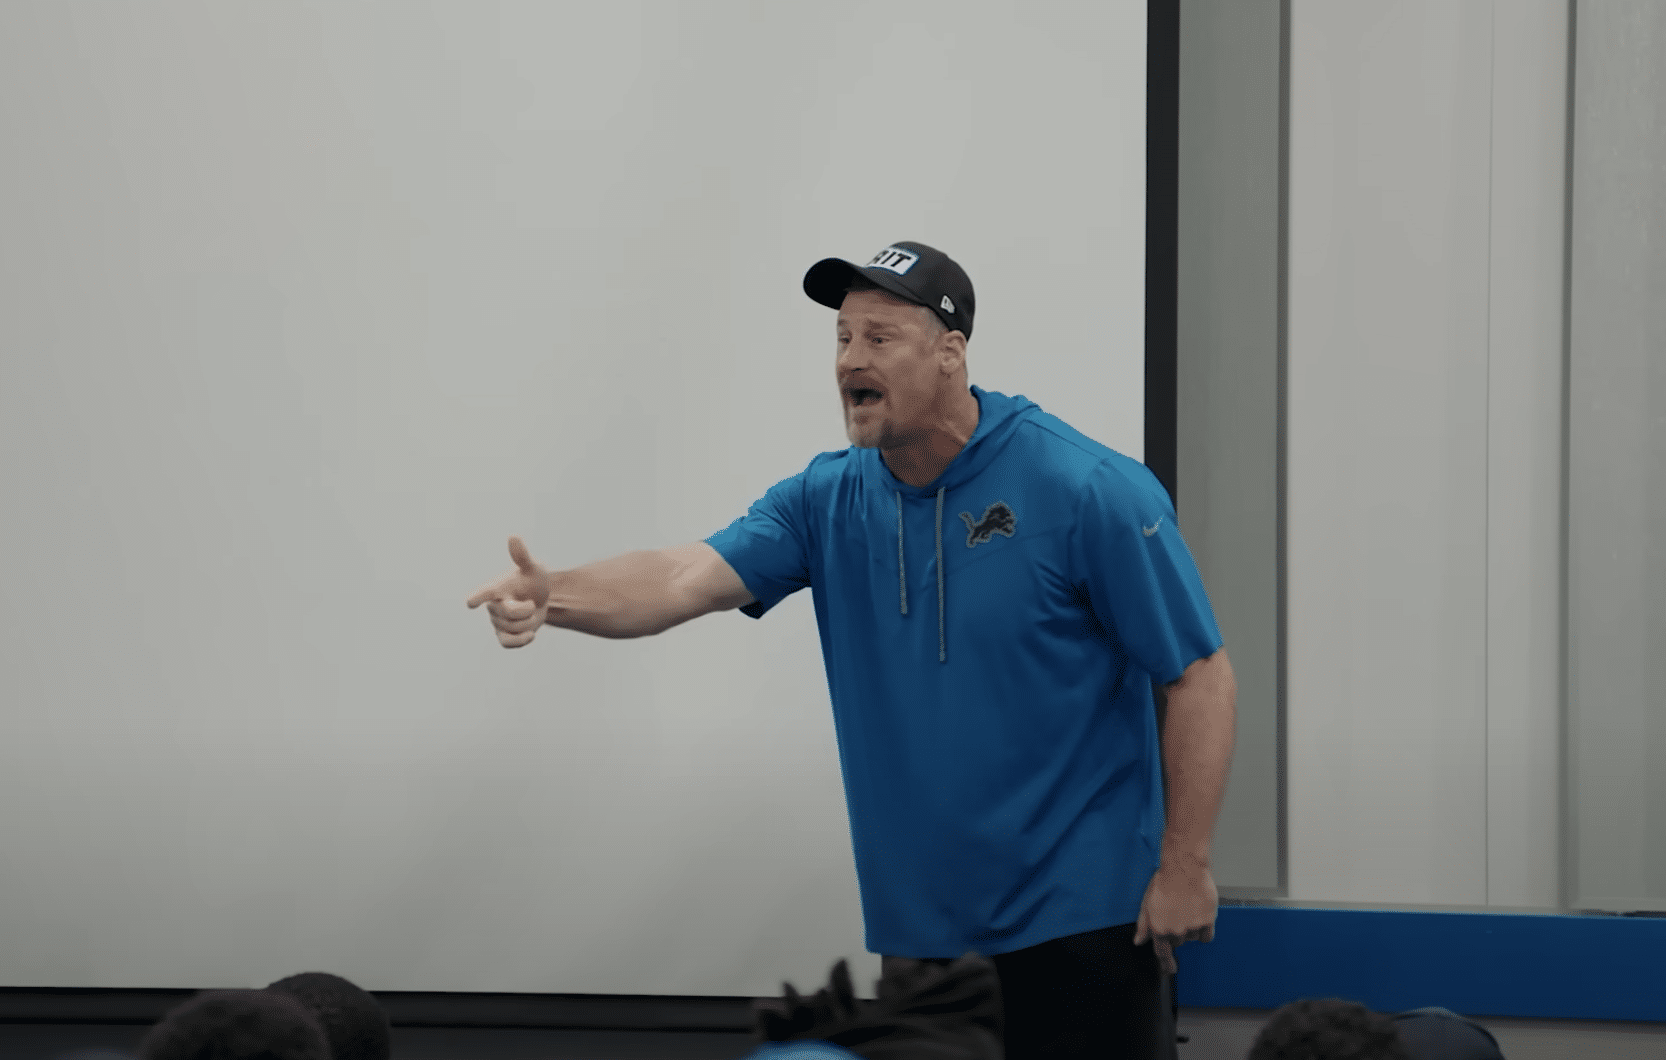 Detroit Lions release behind-the-scenes video